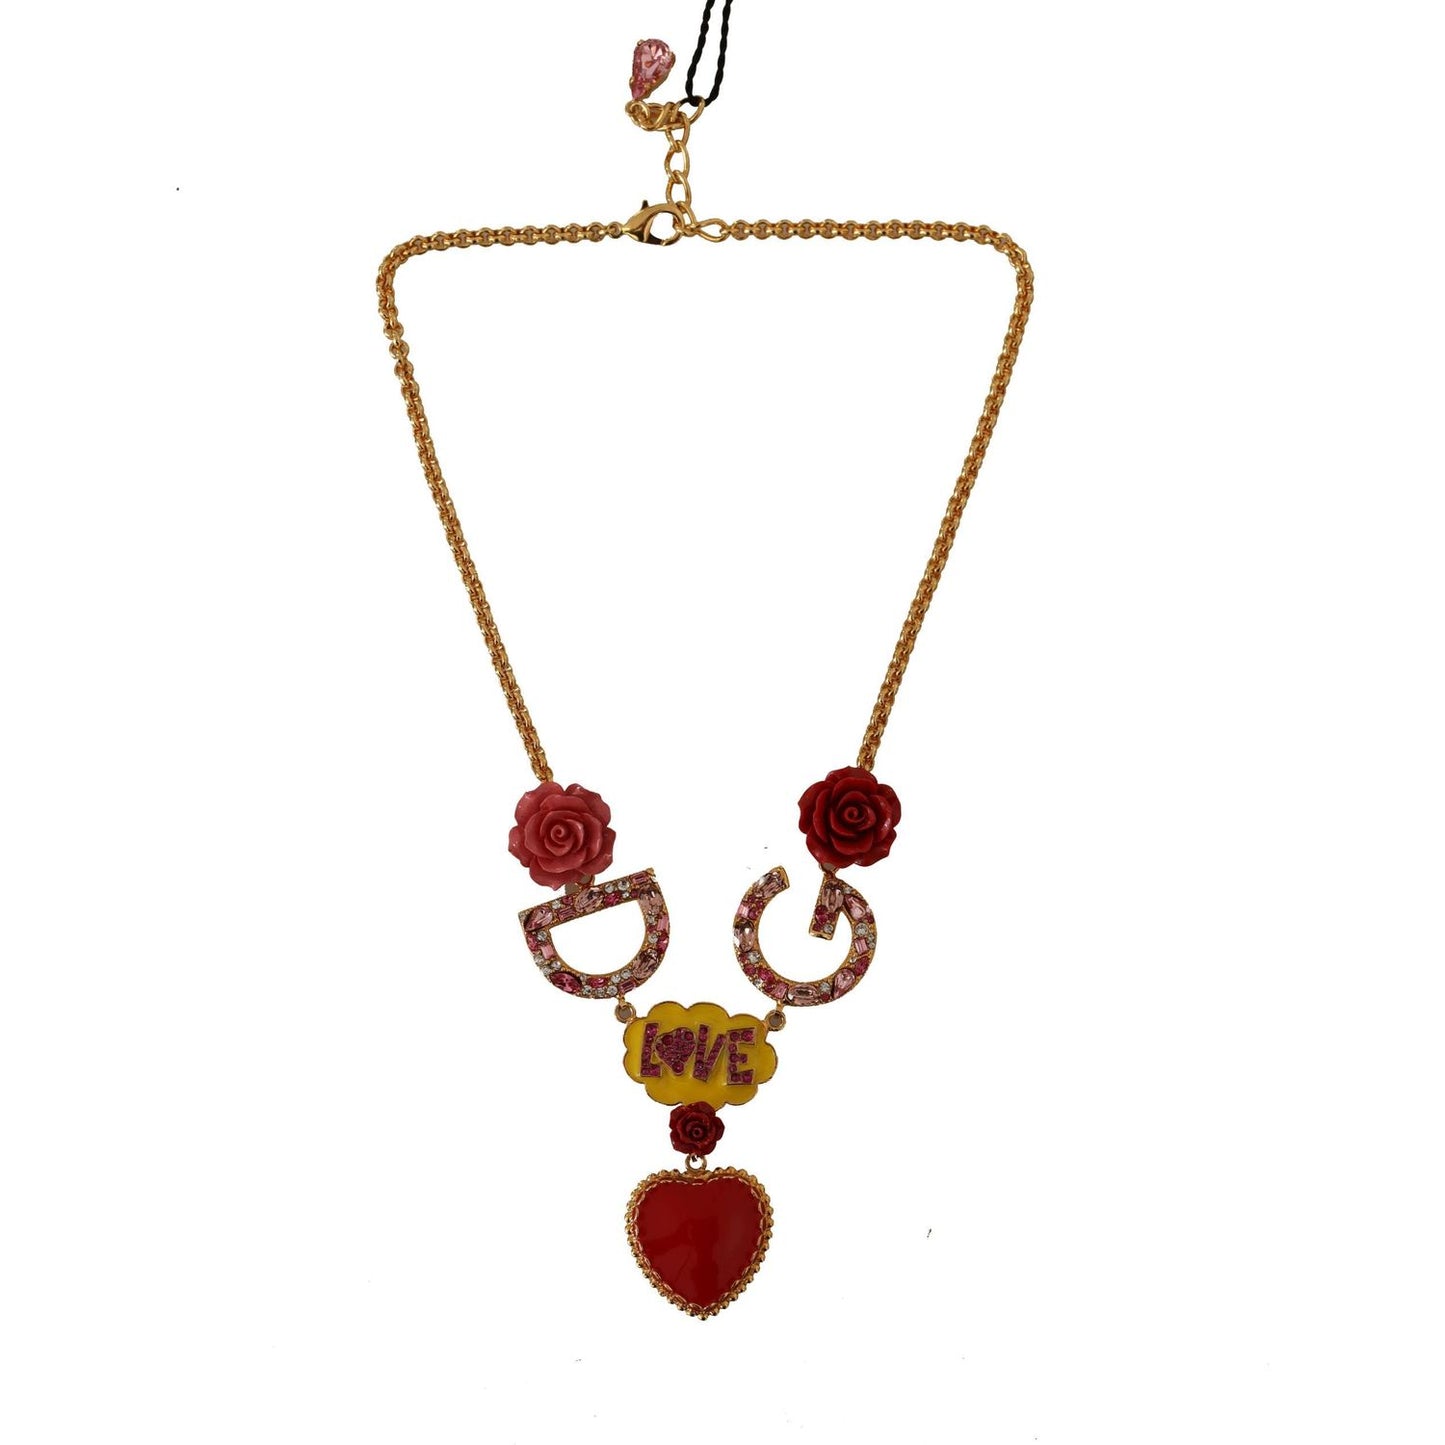 Dolce & Gabbana Glamorous Gold Crystal Charm Necklace gold-rose-love-crystal-charm-chain-necklace WOMAN NECKLACE IMG_7948-scaled-c9d0e9f6-8d2.jpg